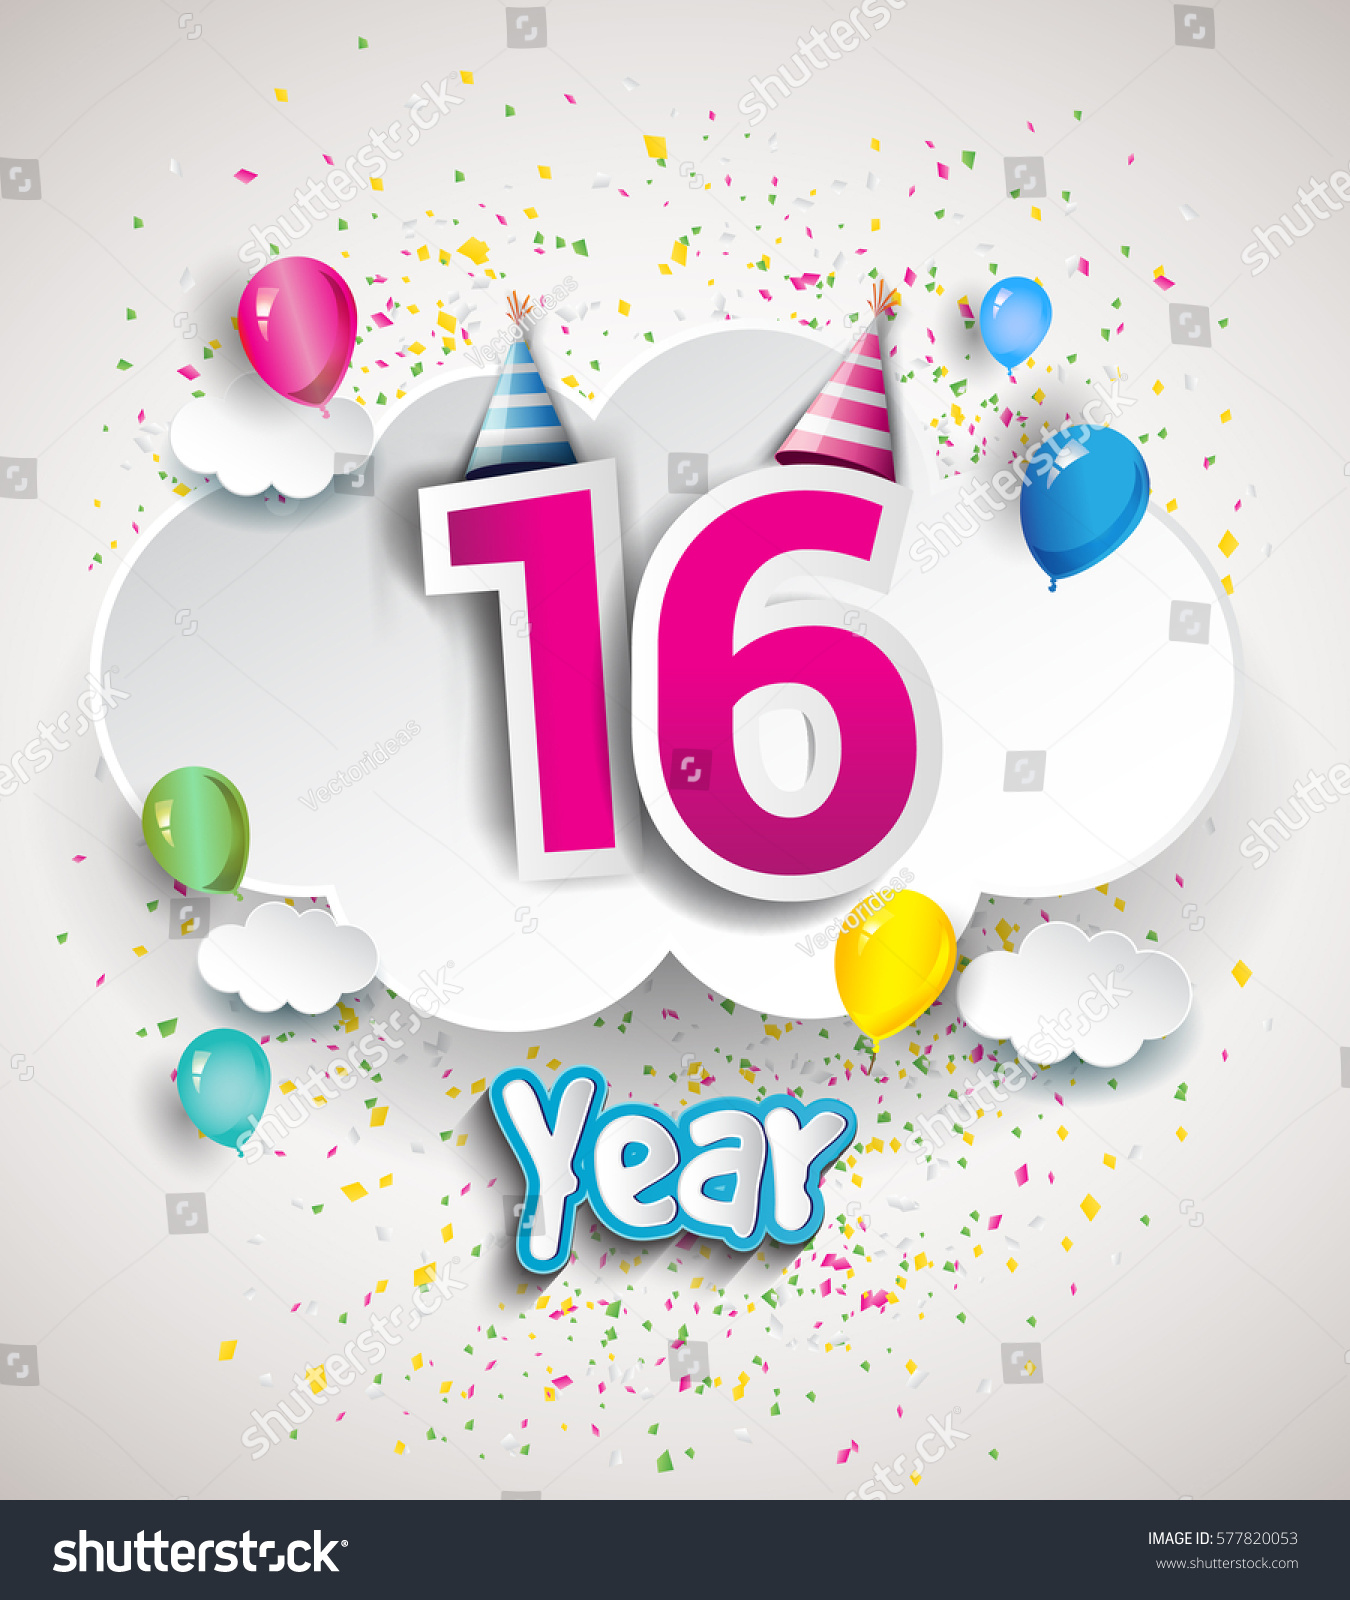 16th Anniversary Celebration Design Clouds Balloons Stock Vector ...